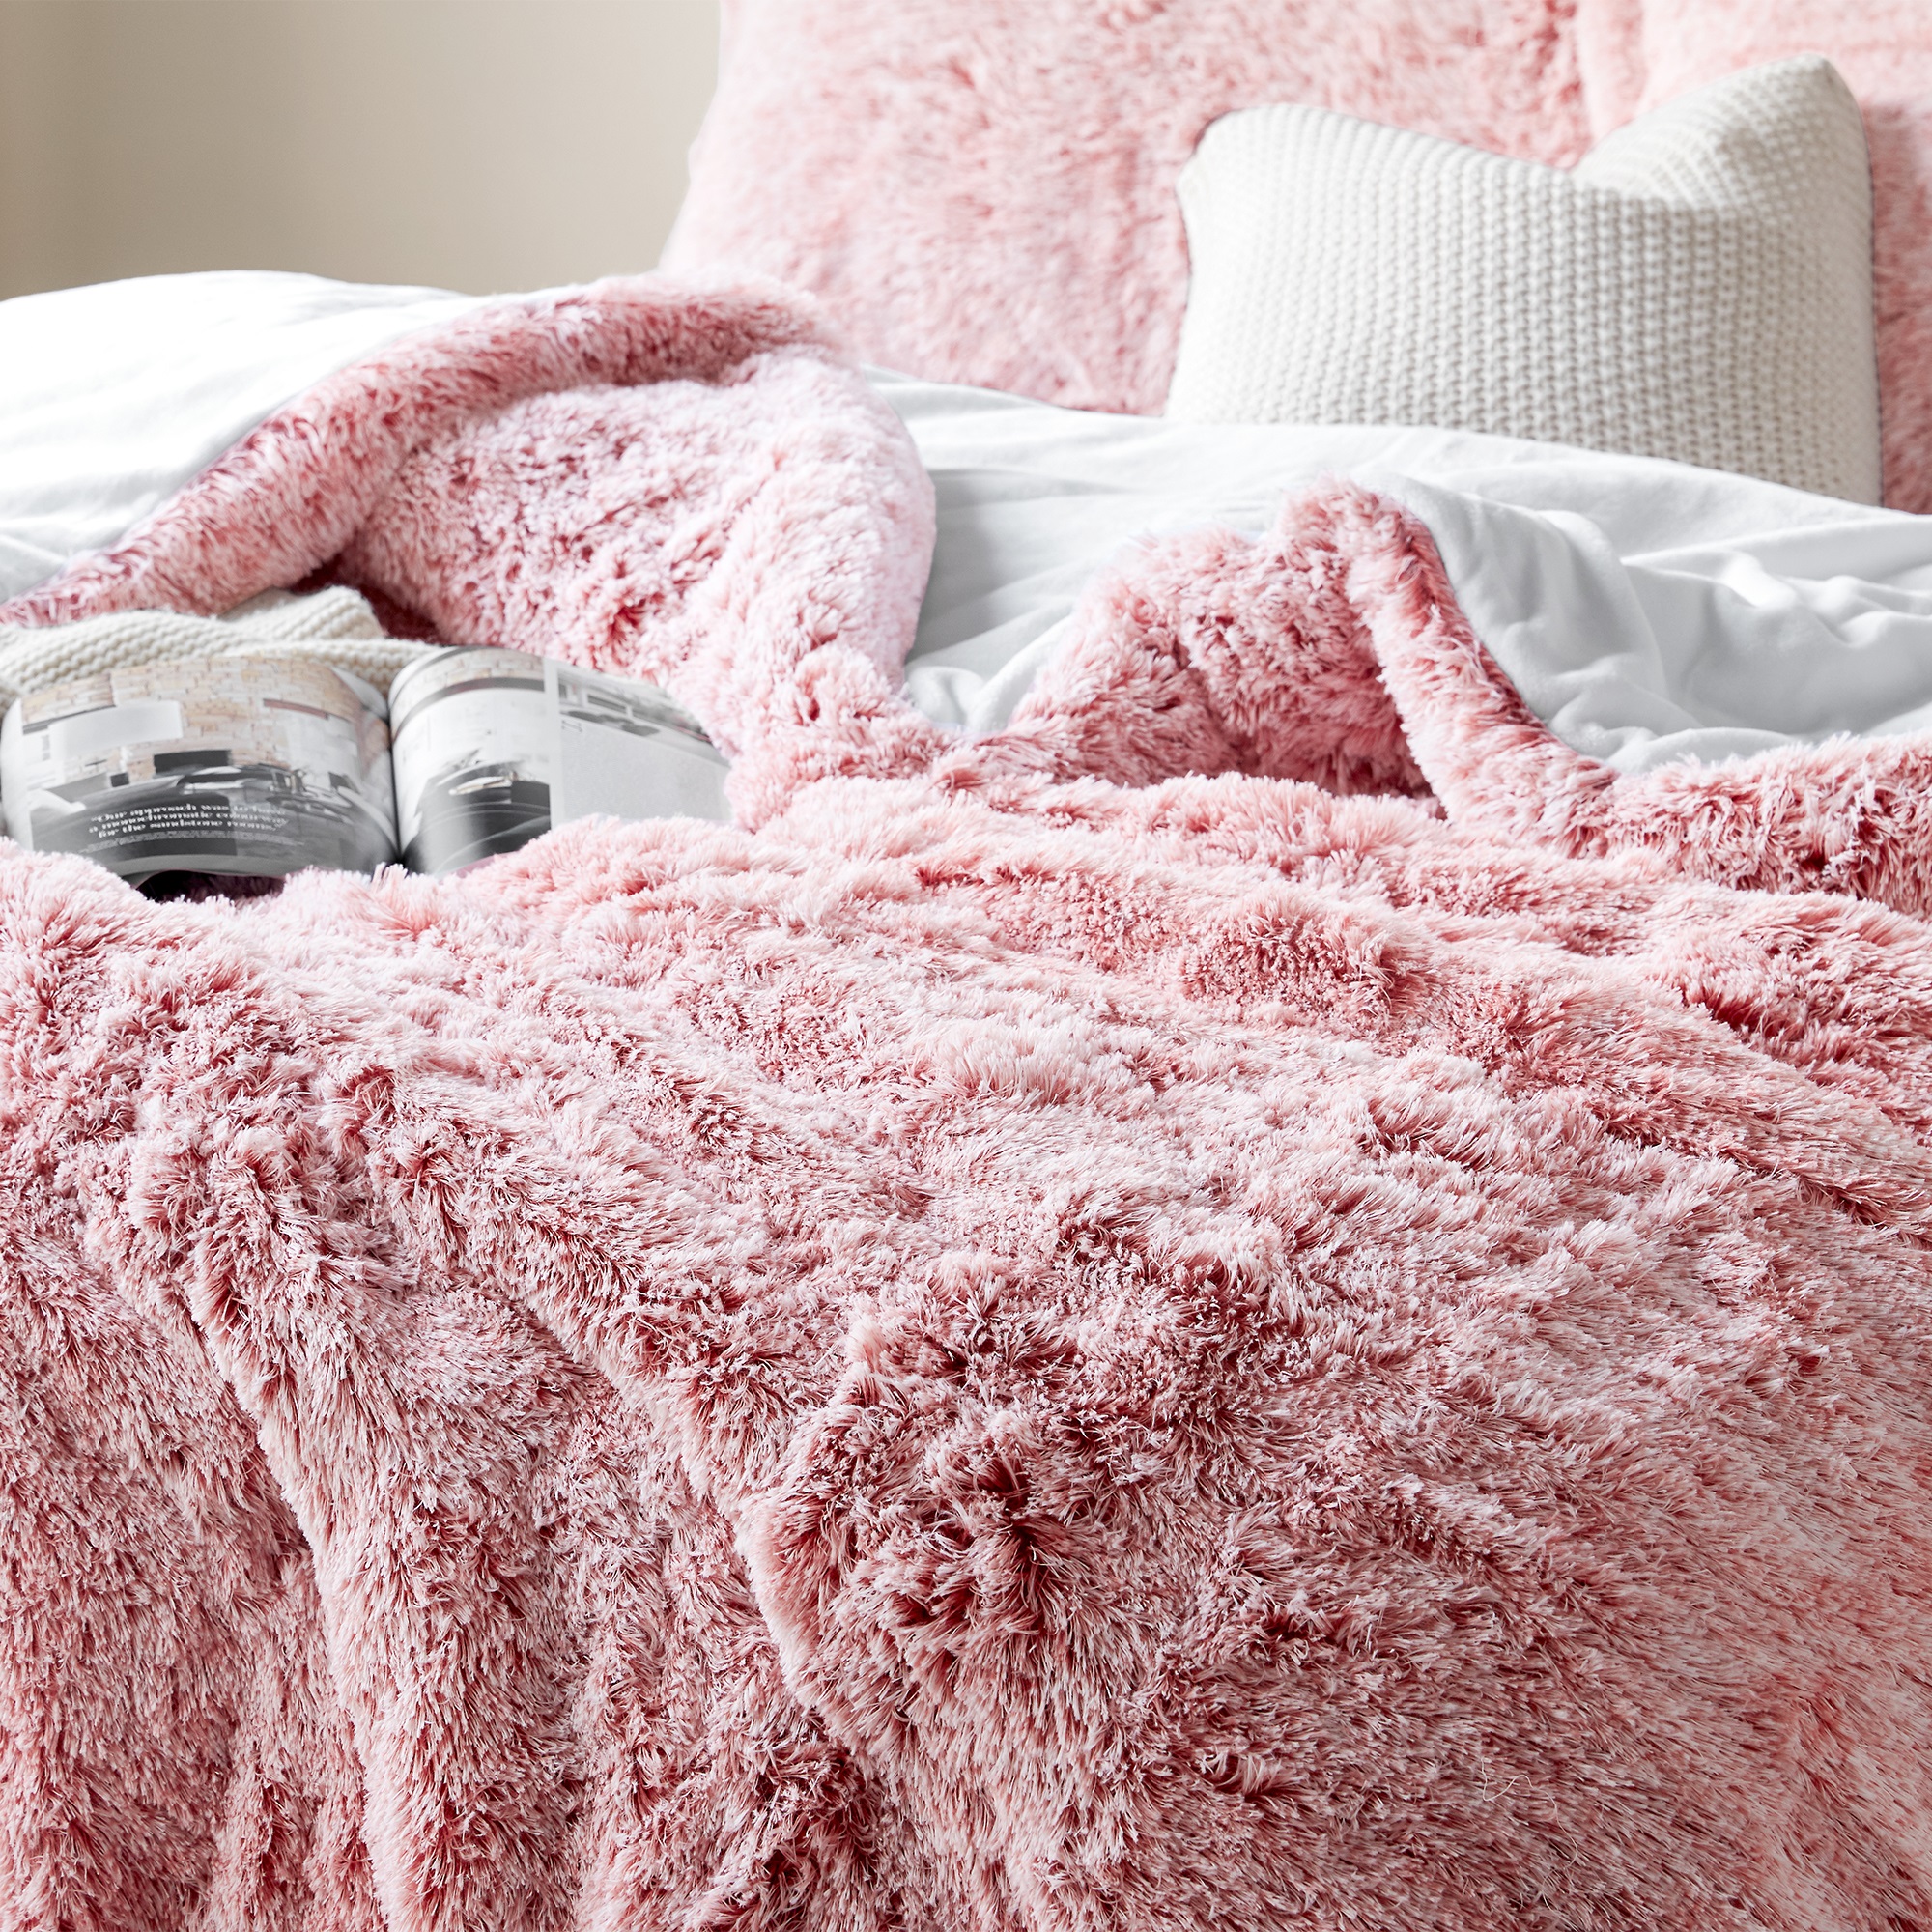 Are You Kidding - Coma Inducer Oversized Comforter - Frosted Adobe Brick